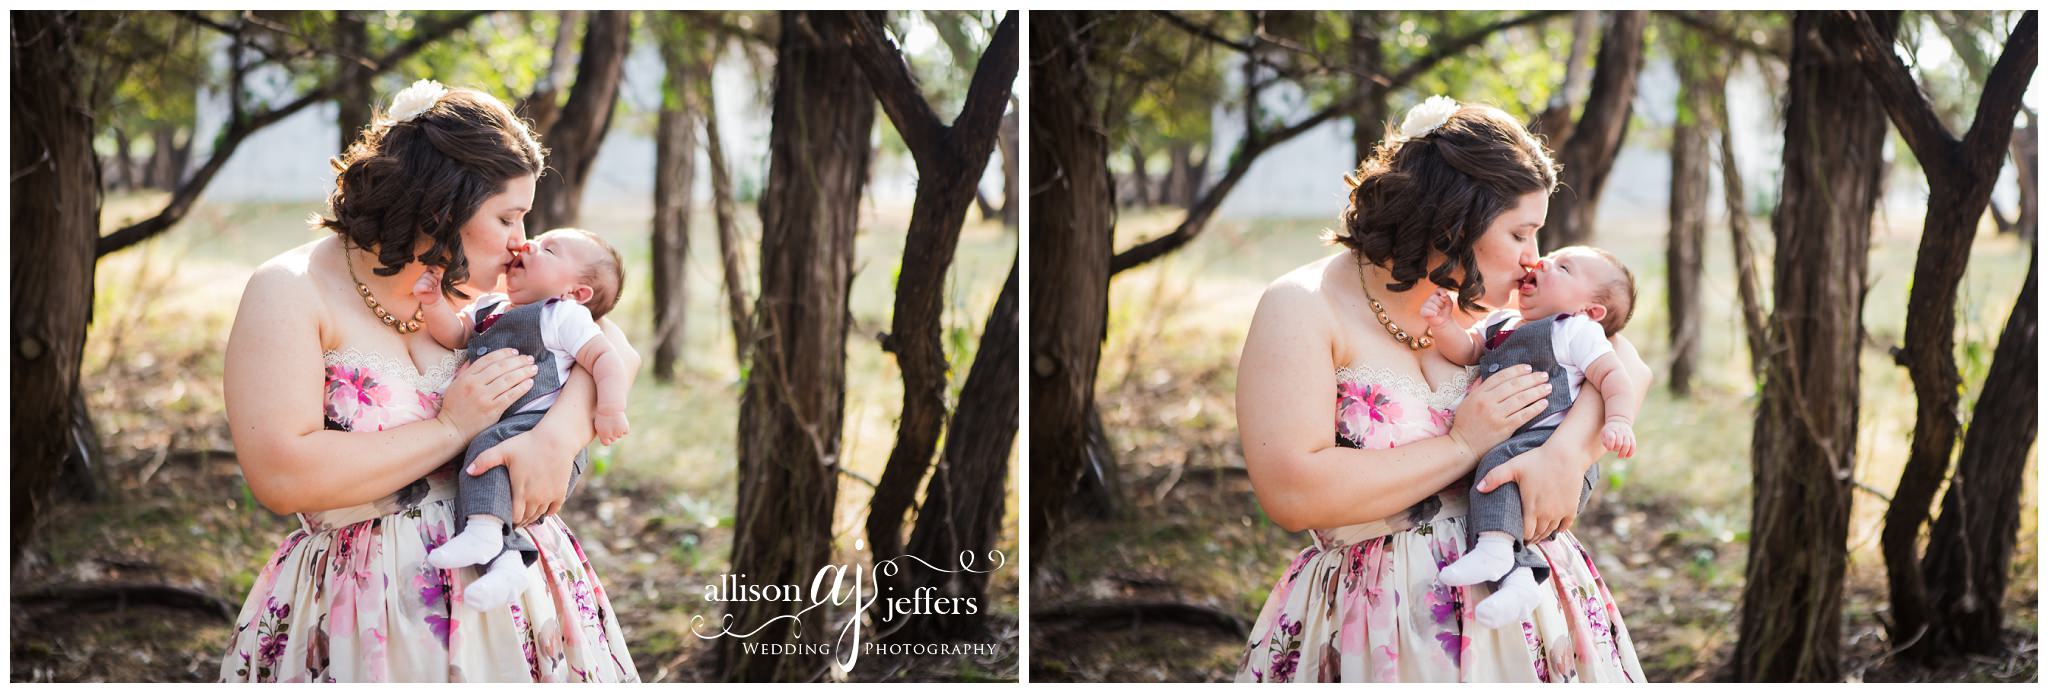 Kerrville Wedding Photographer Unique fun wedding with floral dress 0019